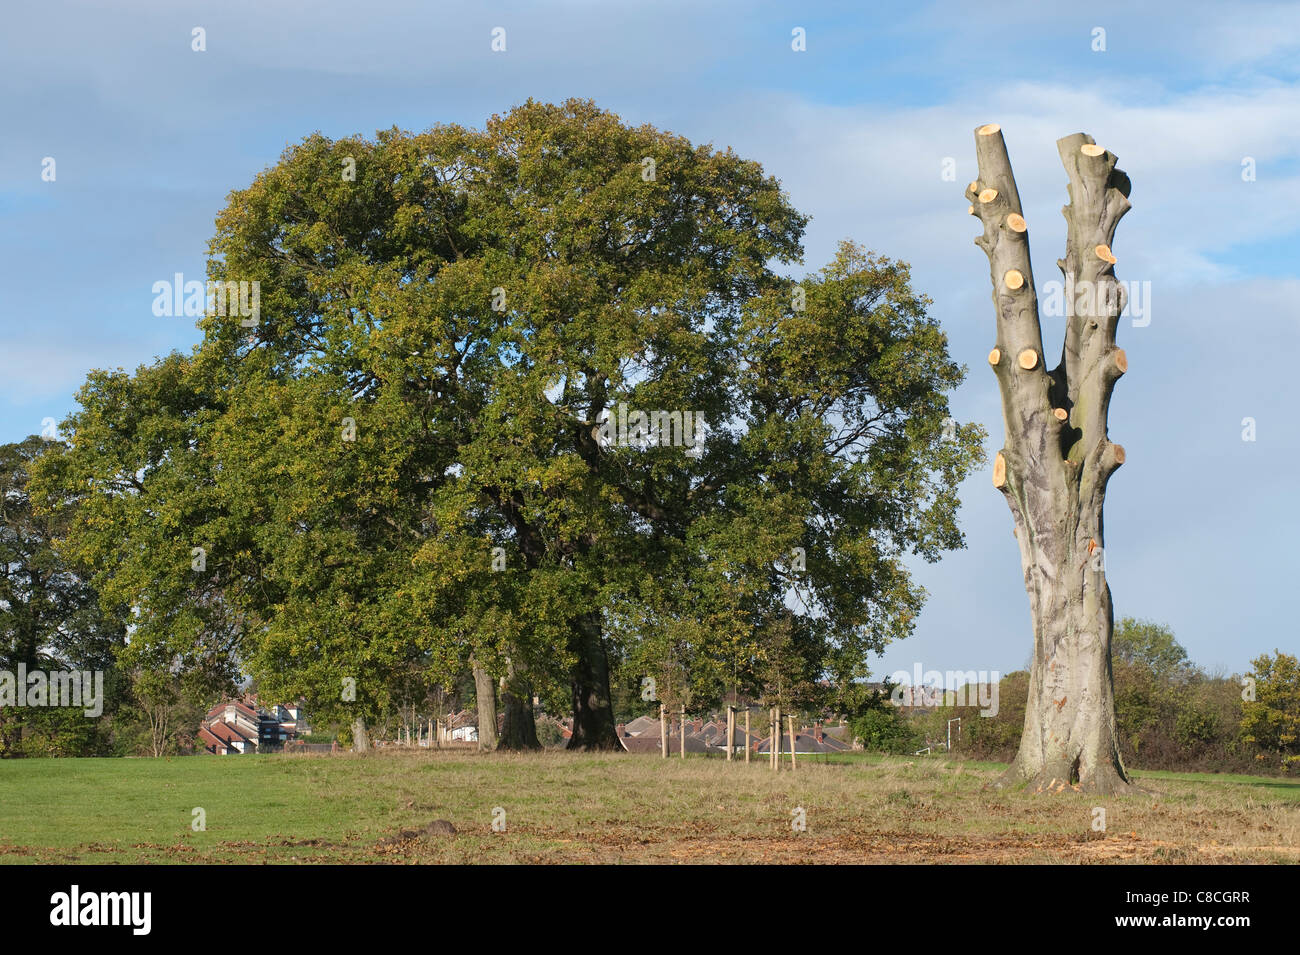 Tall large mature tree fully pruned to its trunk Stock Photo